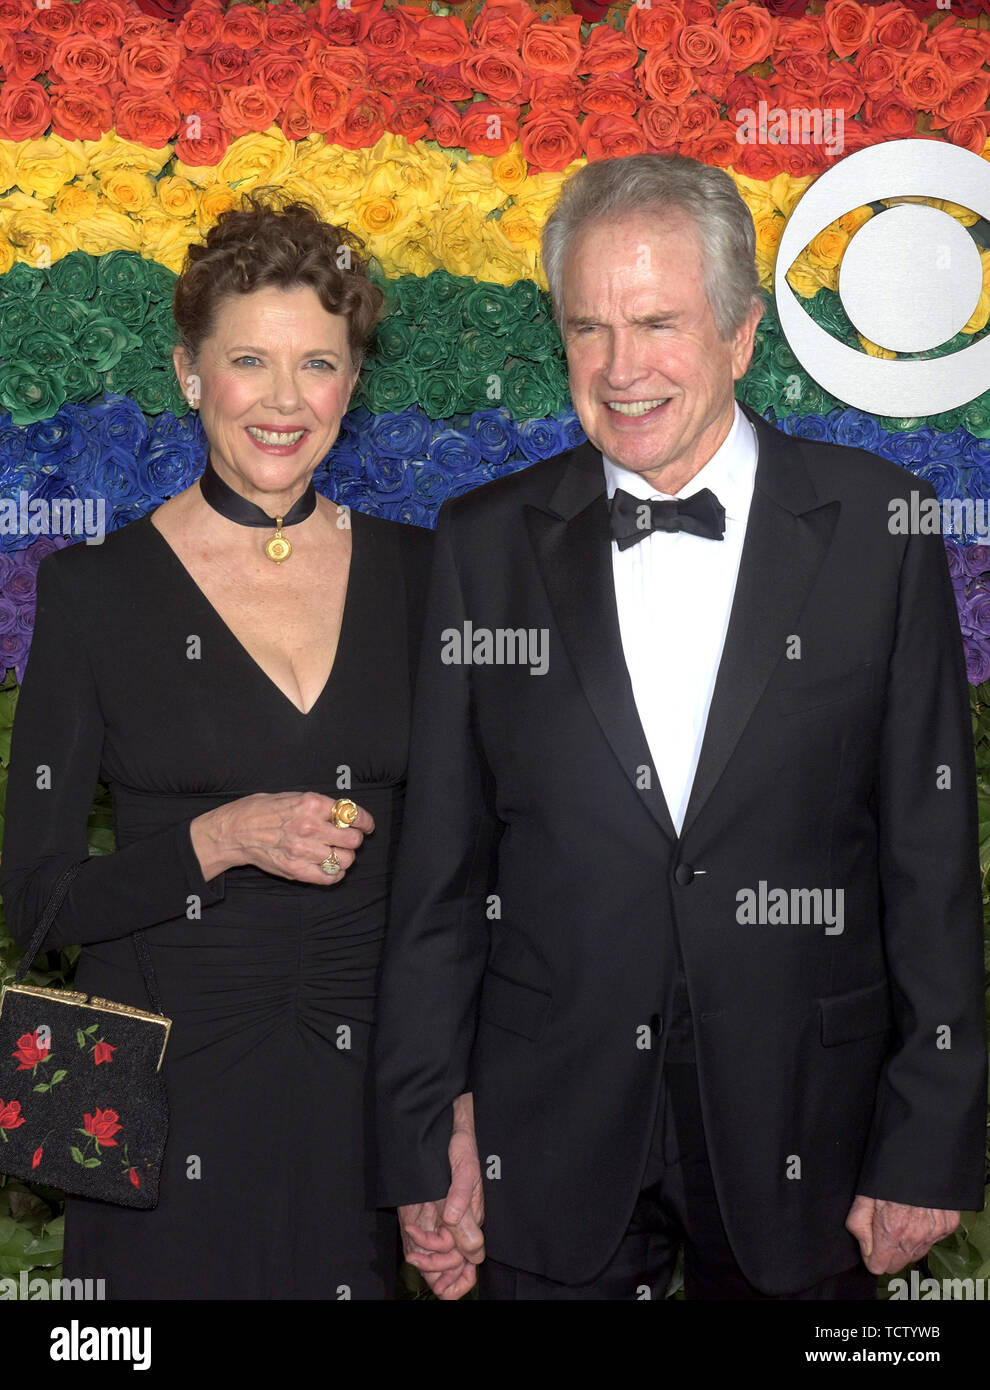 NEW YORK, NEW YORK - JUNE 09: Warren Beatty, Annette Bening attend the 73rd Annual Tony Awards at Radio City Music Hall on June 09, 2019 in New York City. Photo: Jeremy Smith/imageSPACE/MediaPunch Stock Photo